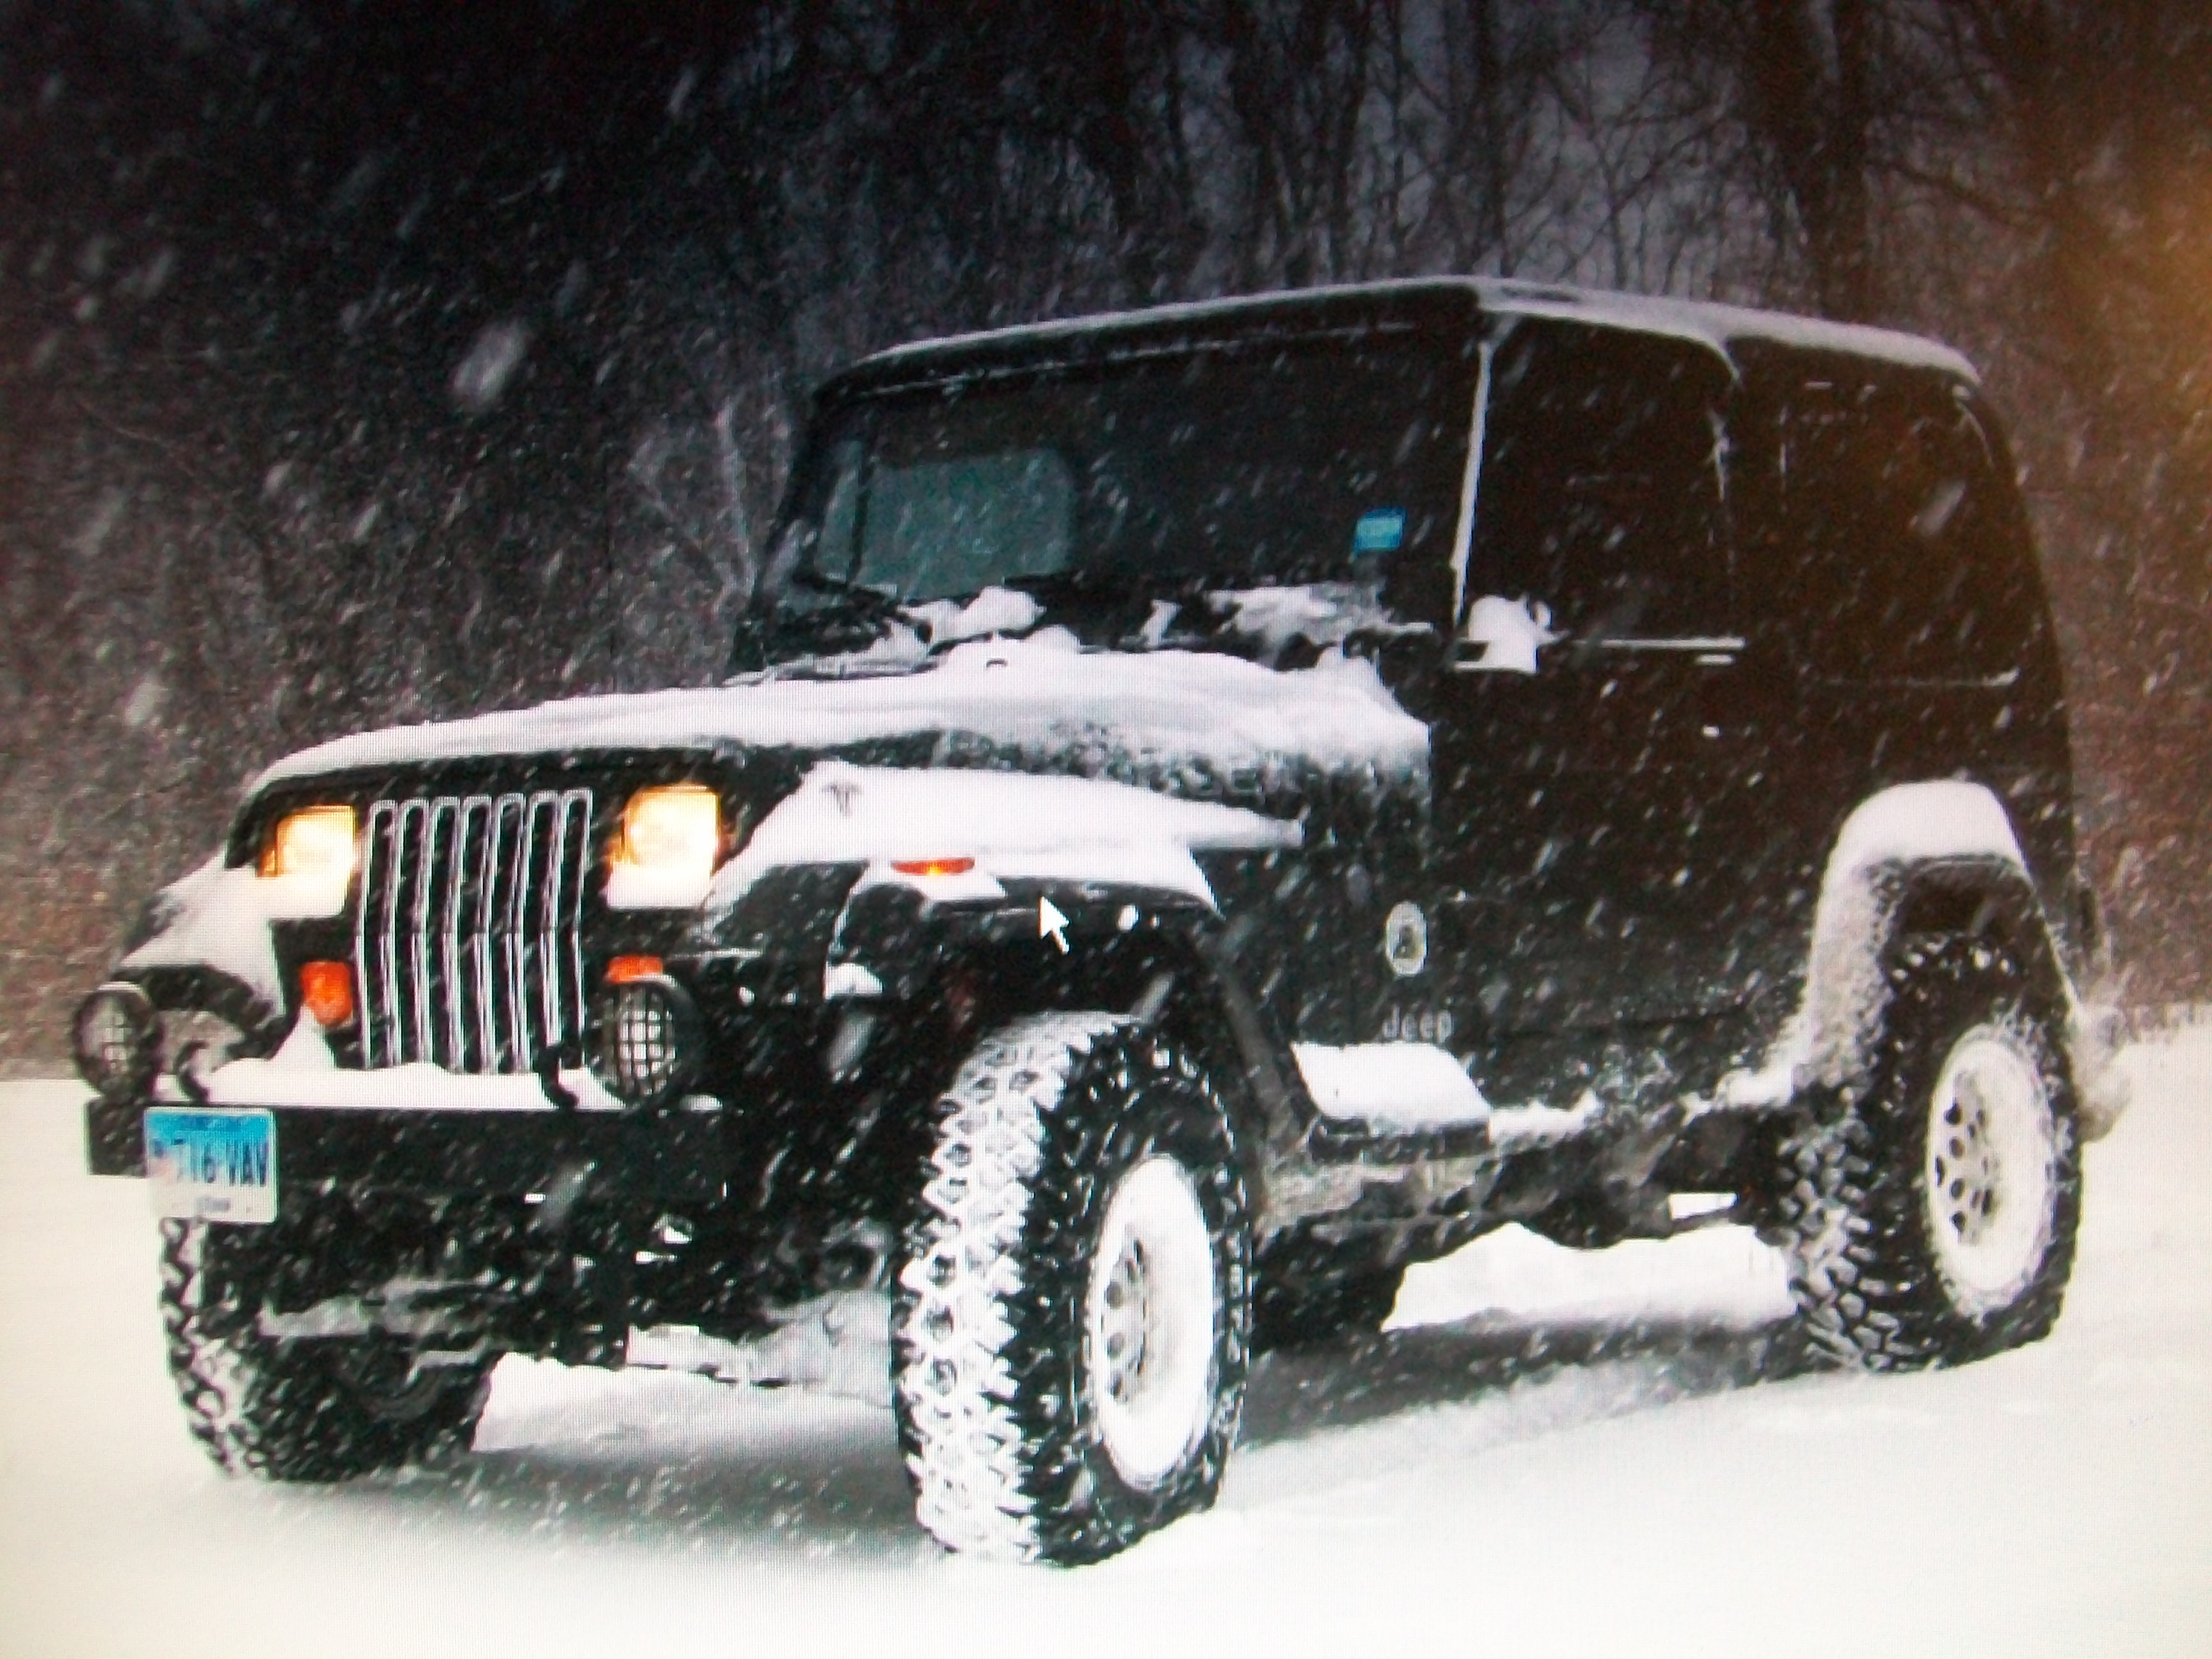 Snow jeep in ct